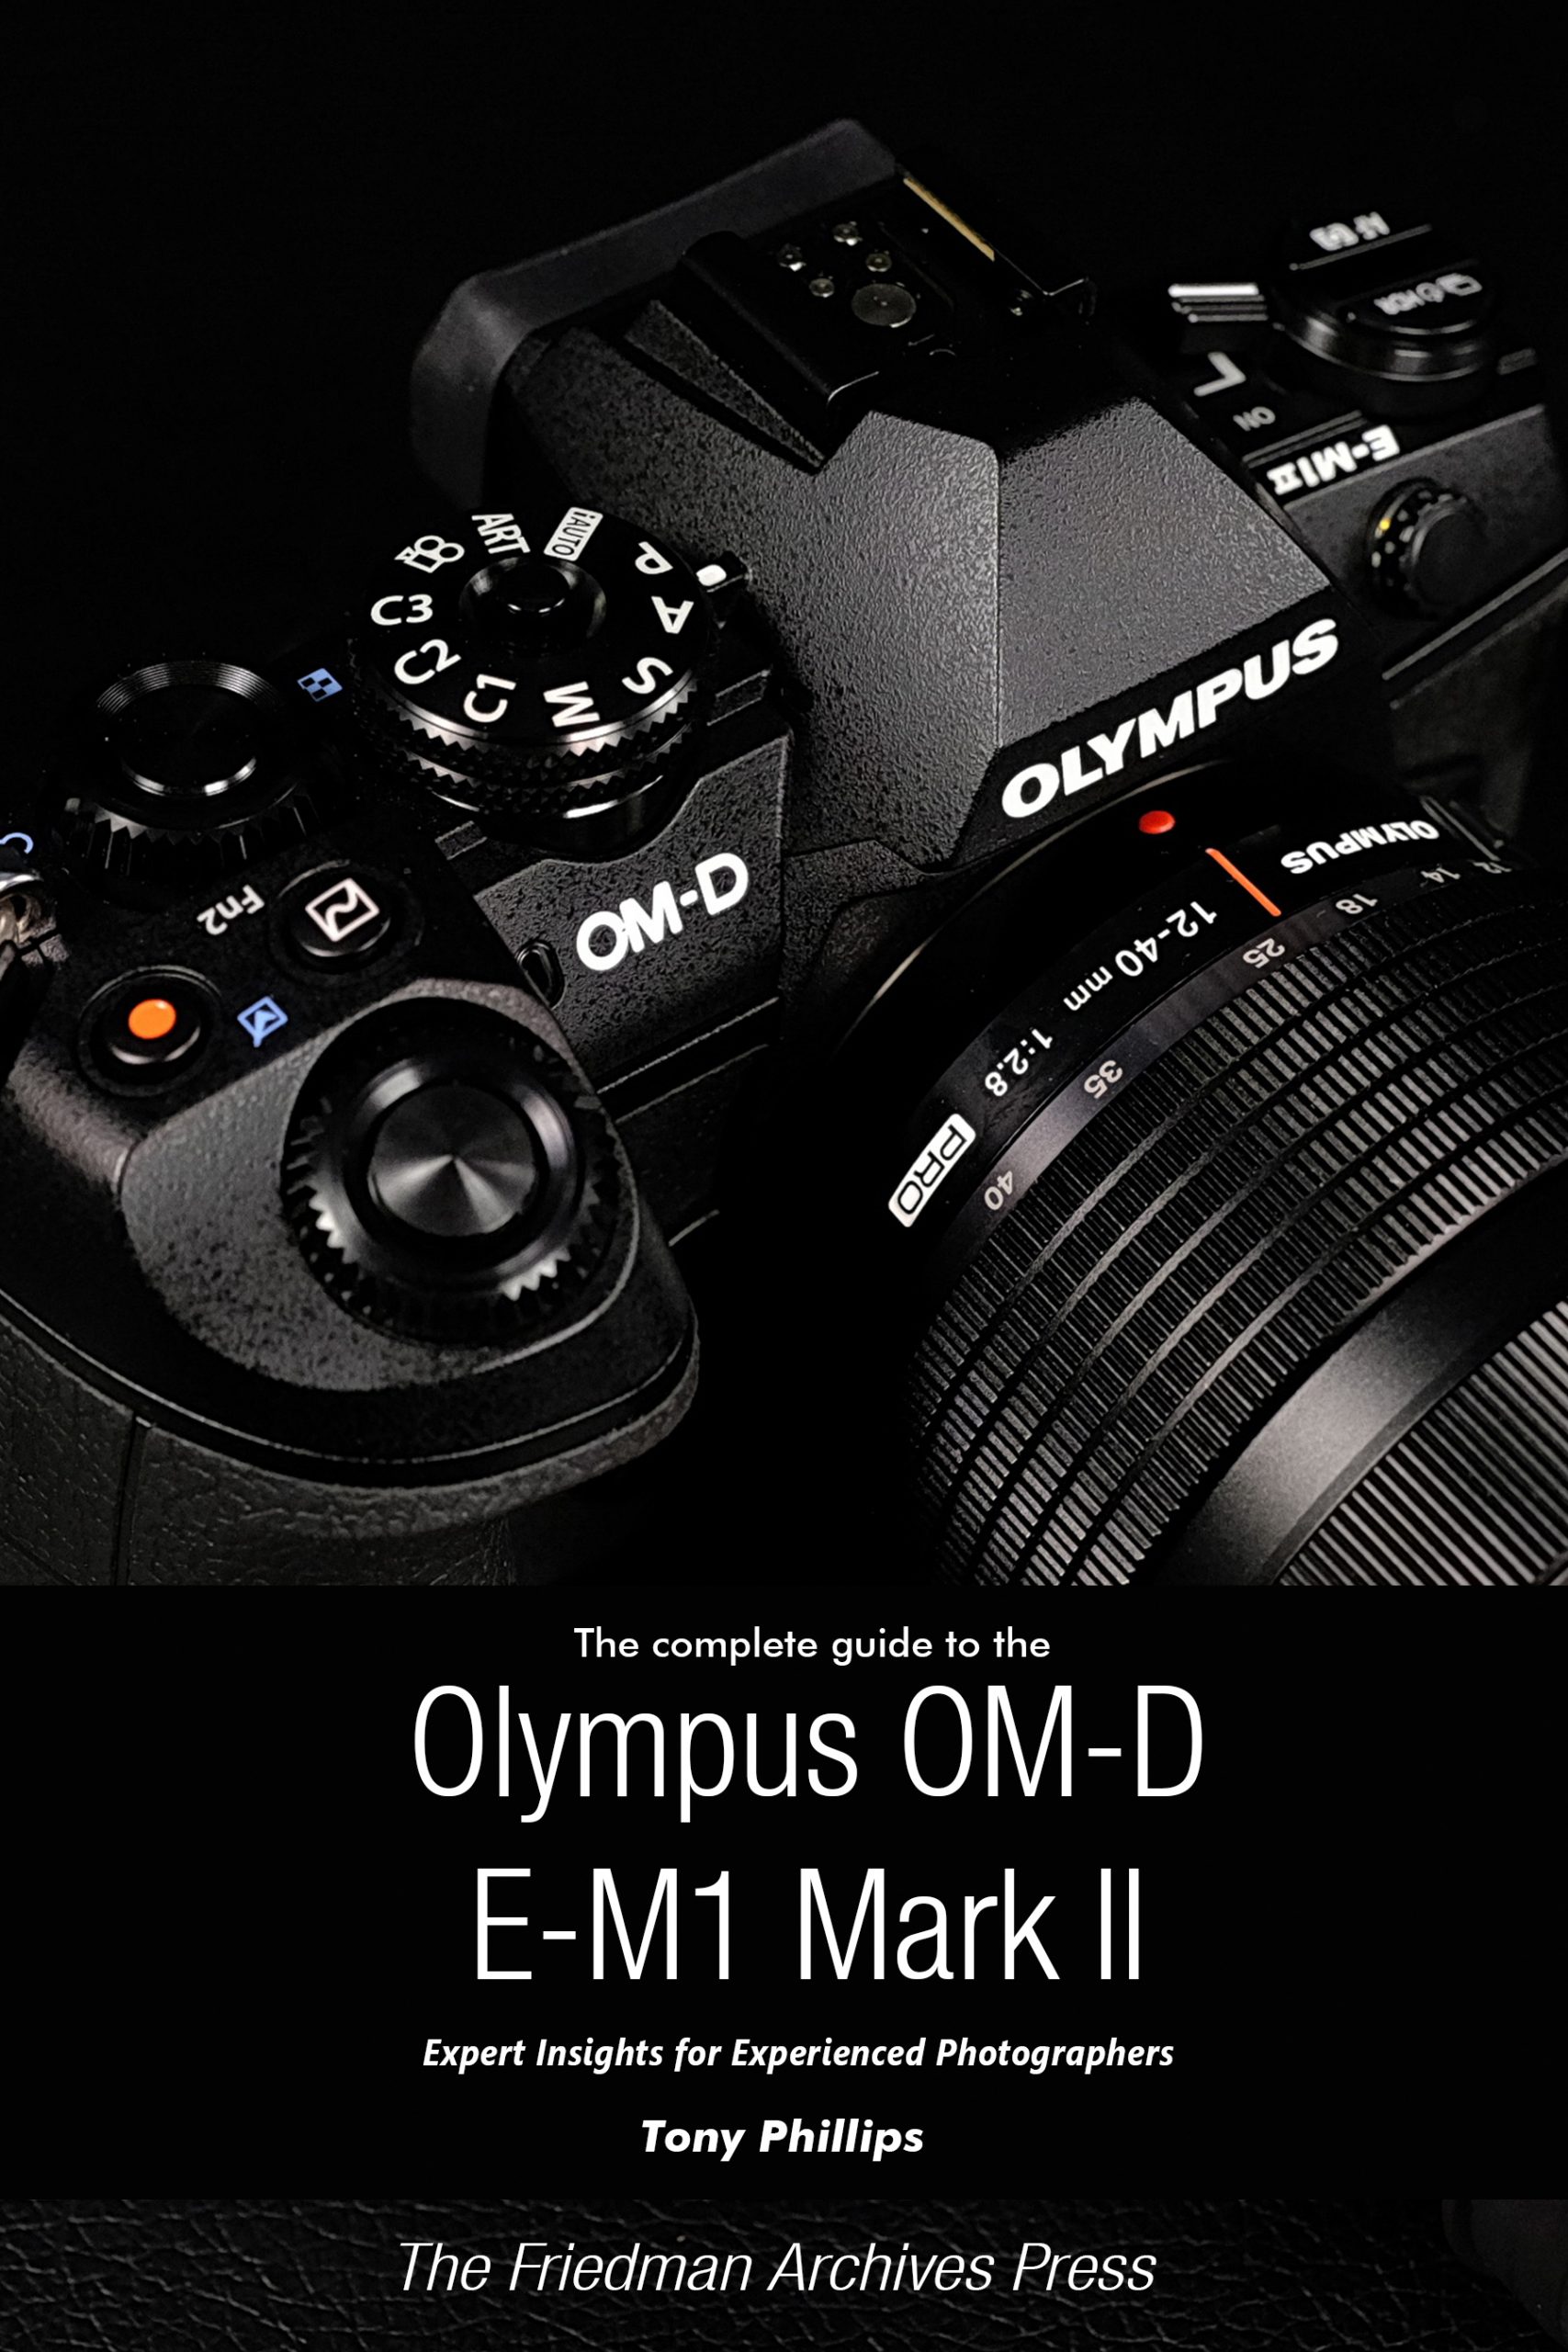 The Complete Guide to the OM System OM-1 – Tony Phillips Photography